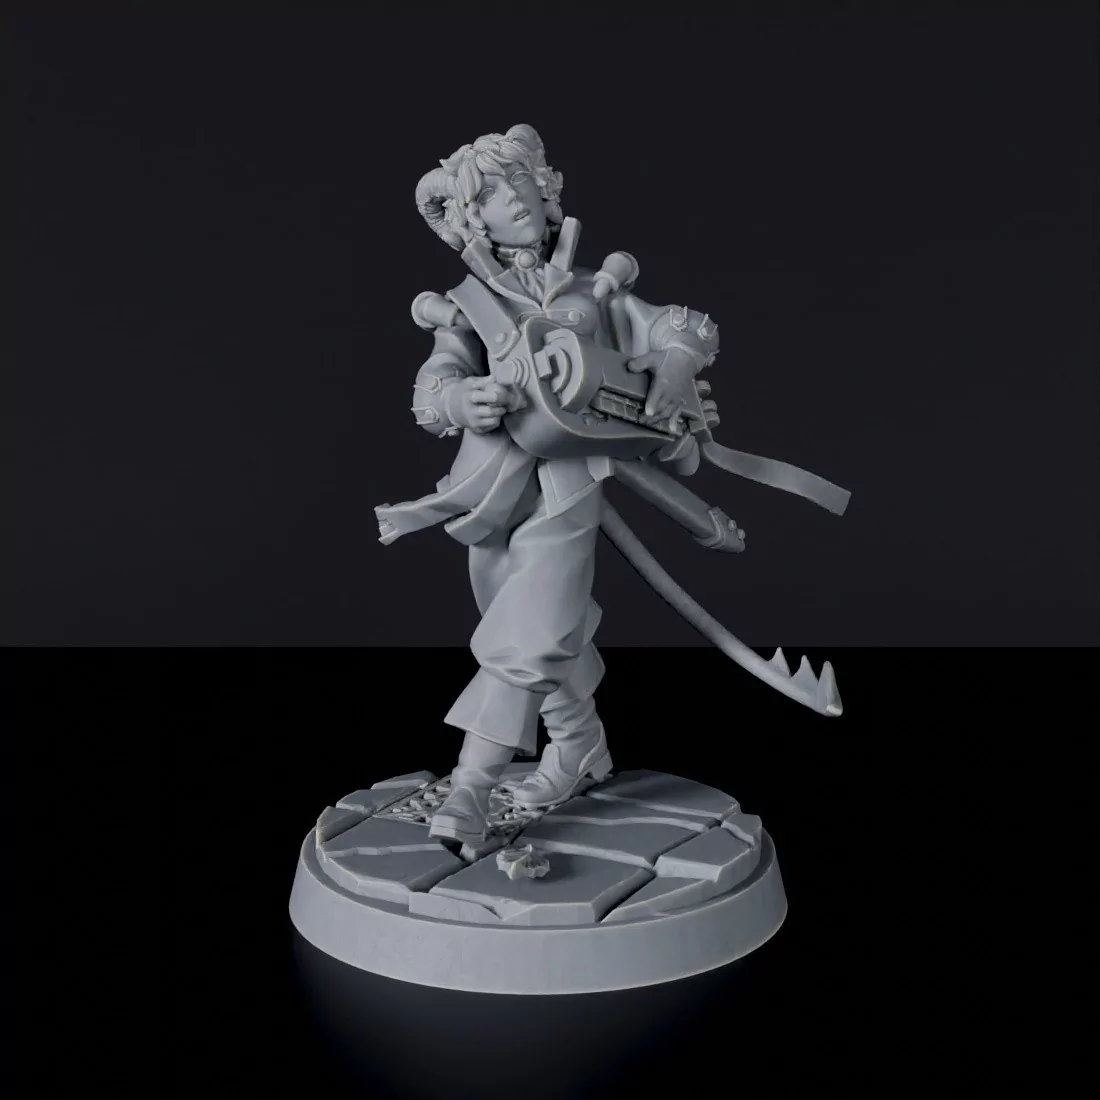 Miniature of Tiefling Female Bard - dedicated set to army for fantasy tabletop RPG games